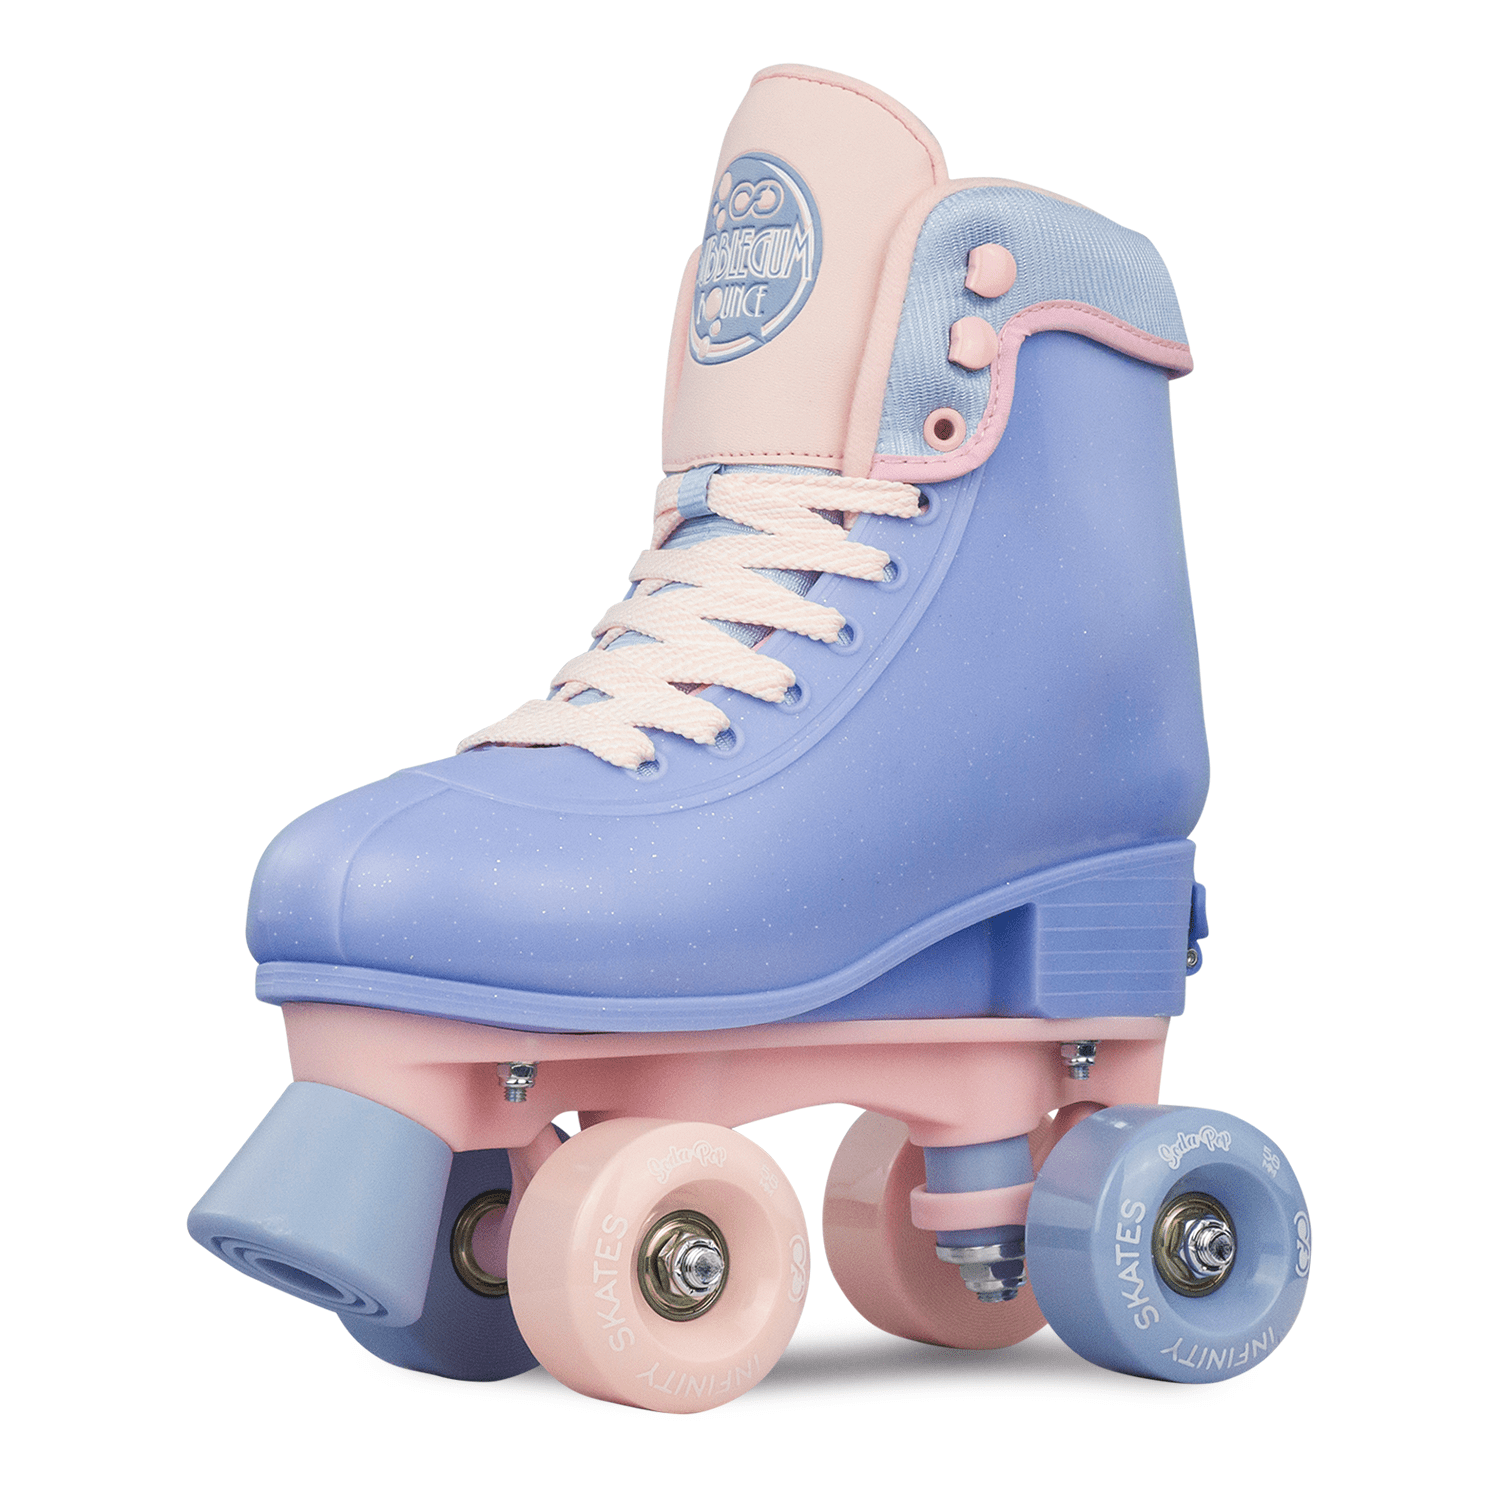 Crazy Skates Adjustable Roller Skates for Girls and Boys Available in 7 Colors Soda Pop Series